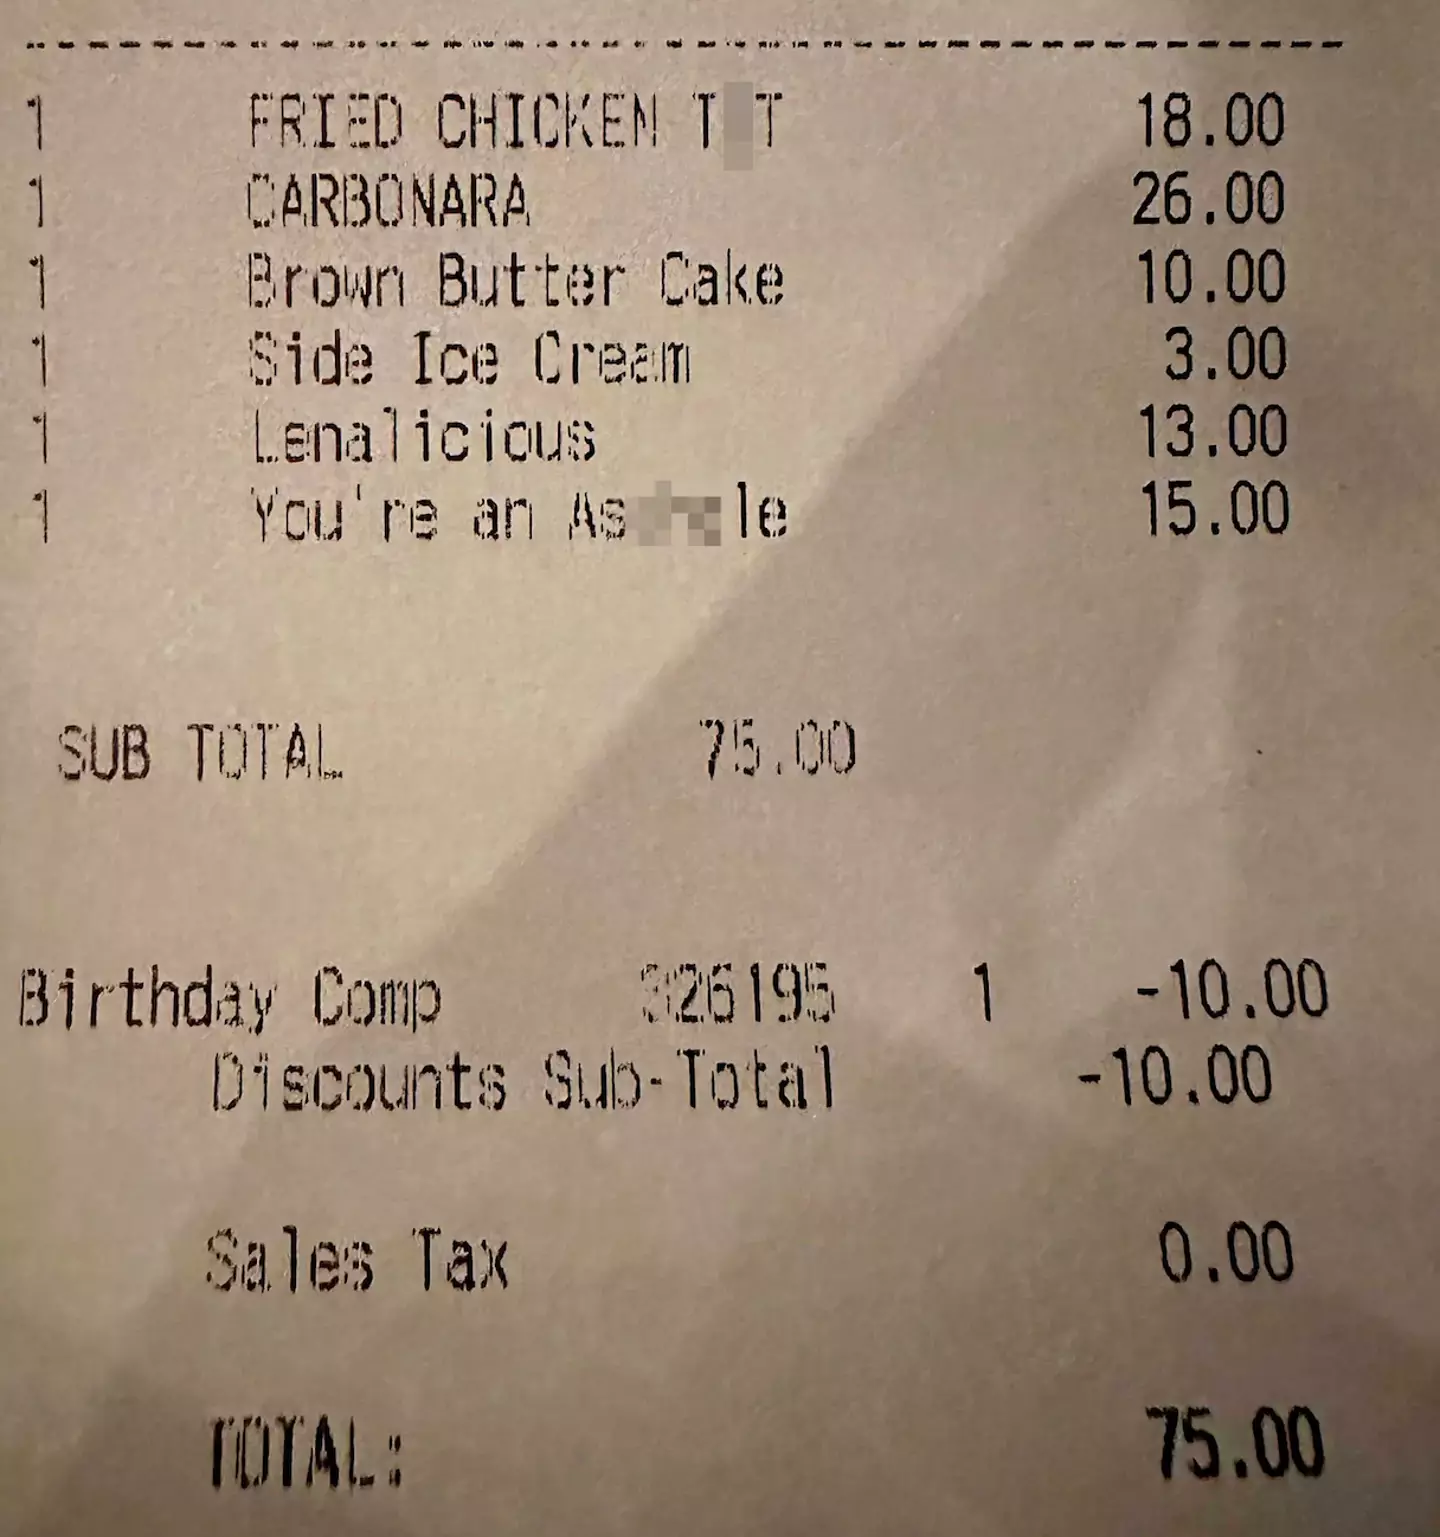 The hilarious receipt has gone viral on Reddit.